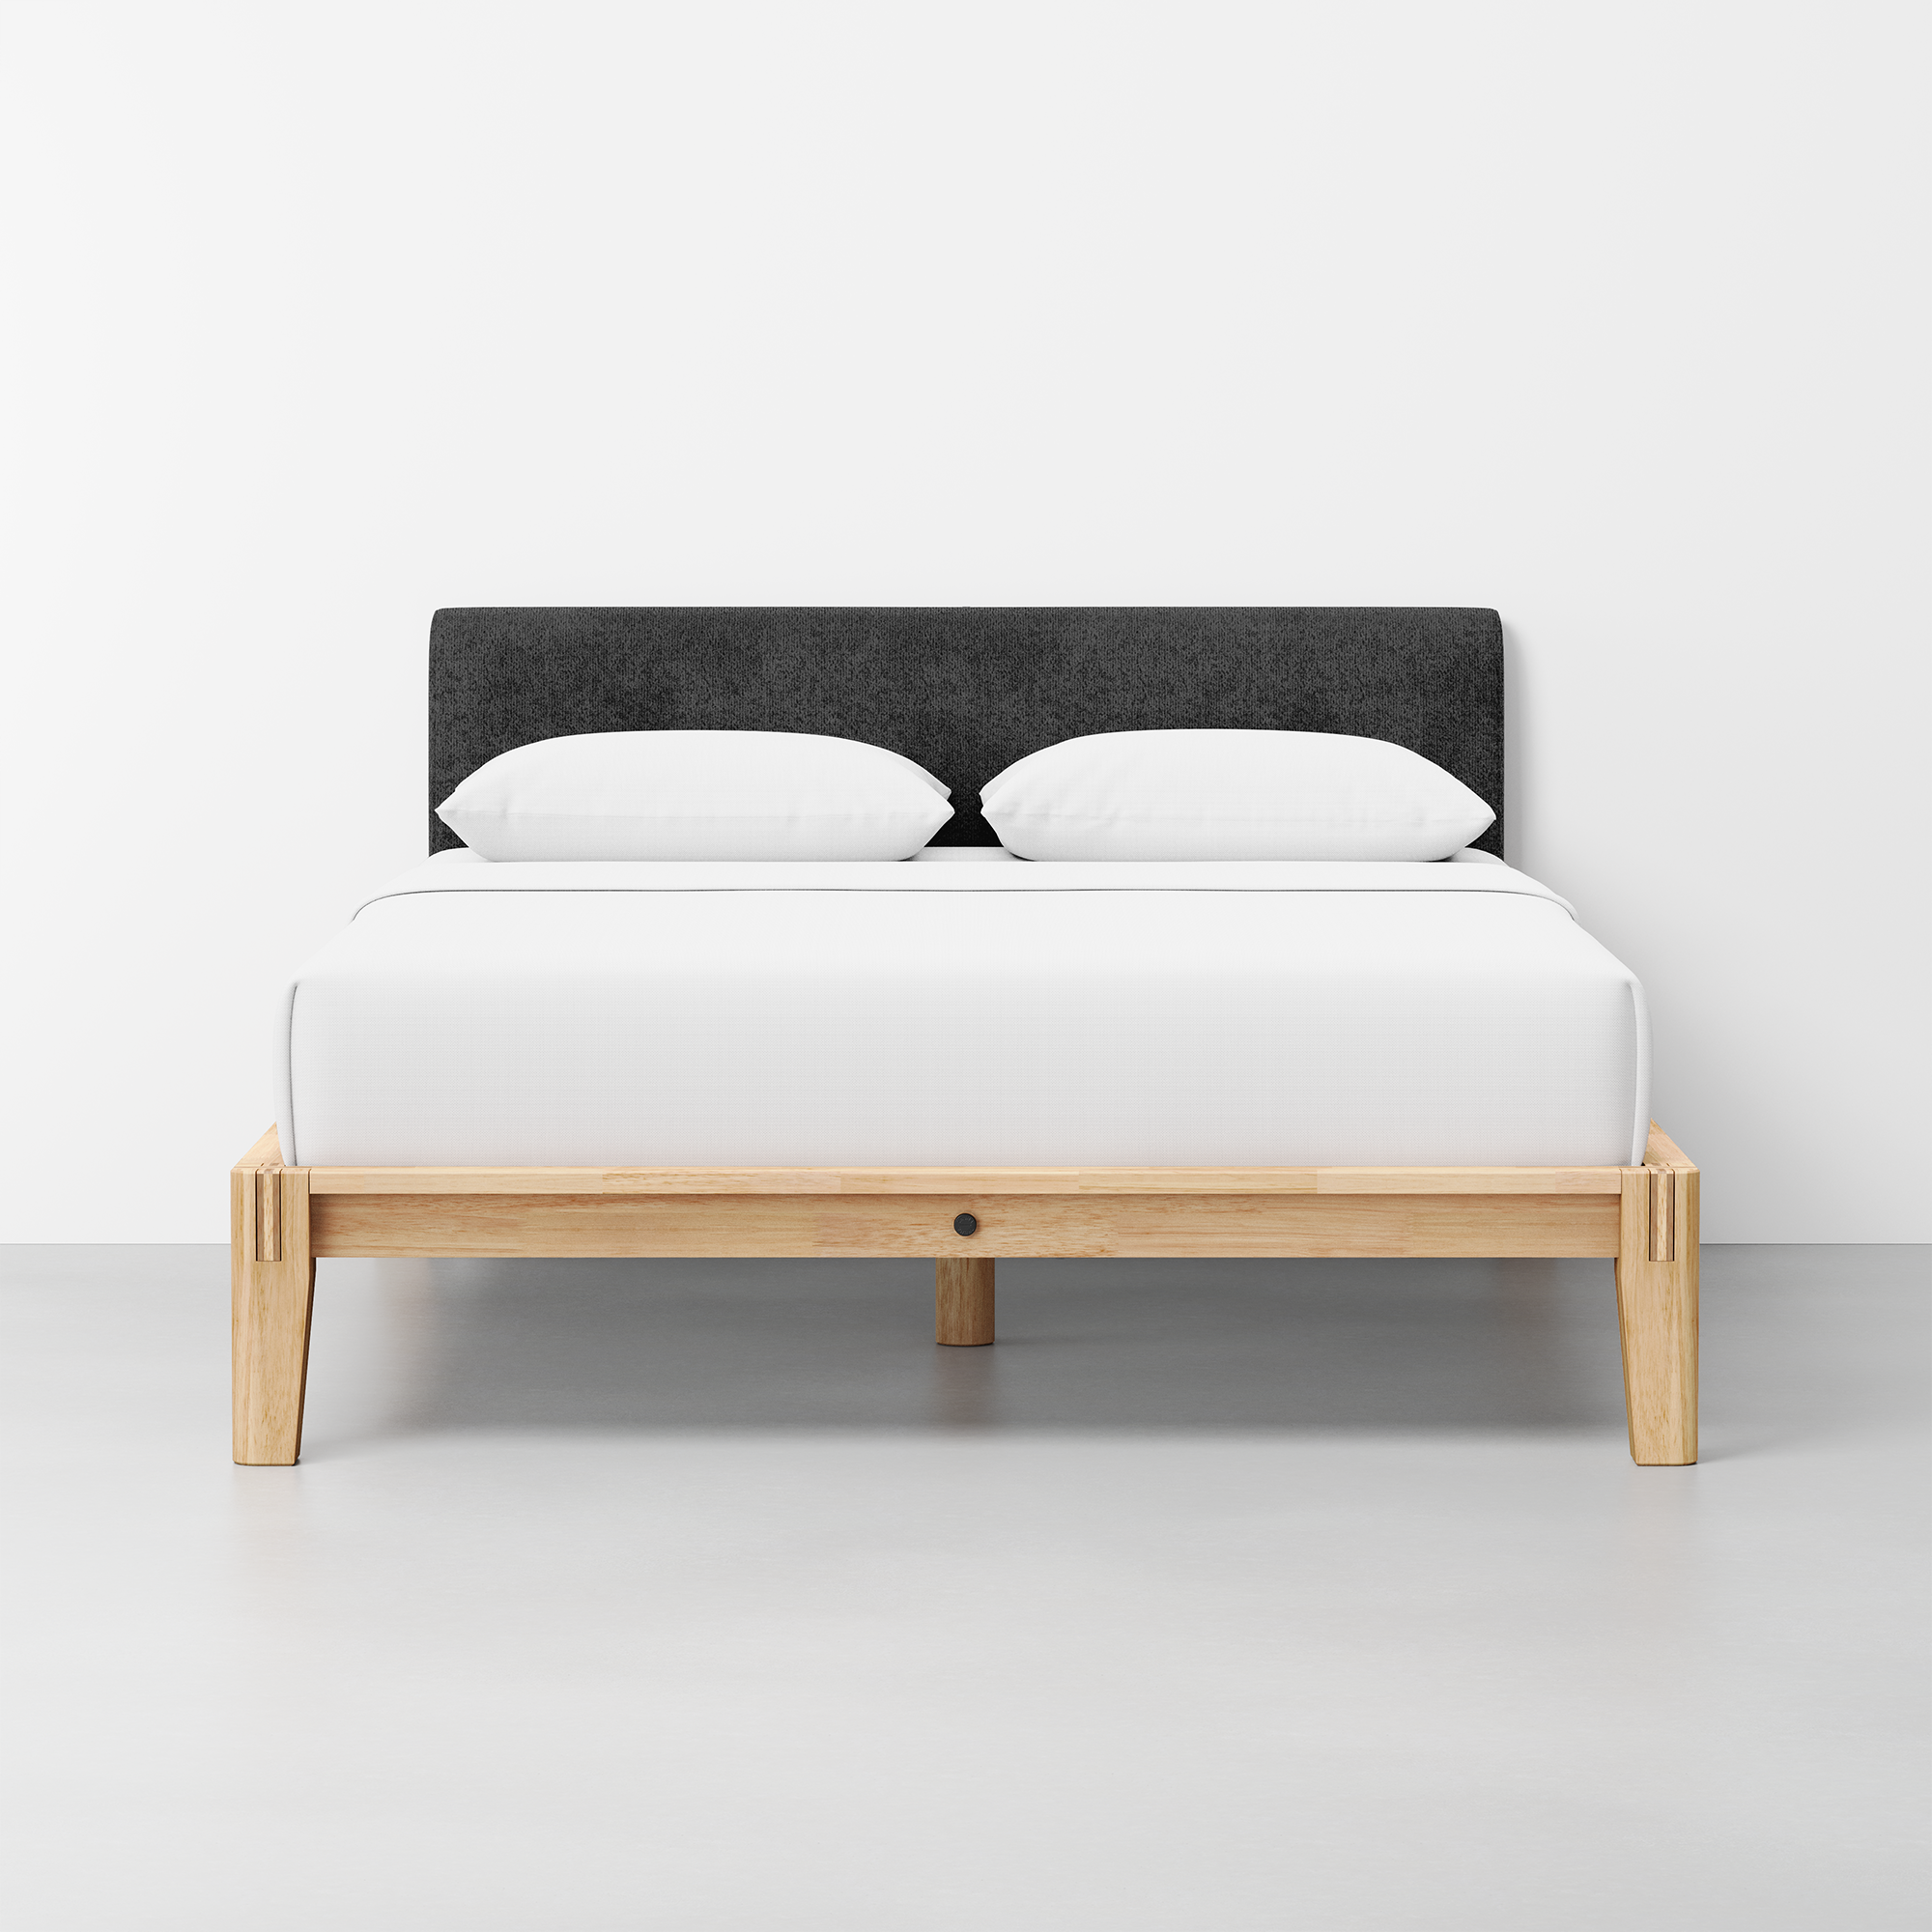 The Bed (Natural / Graphite) - Render - Front